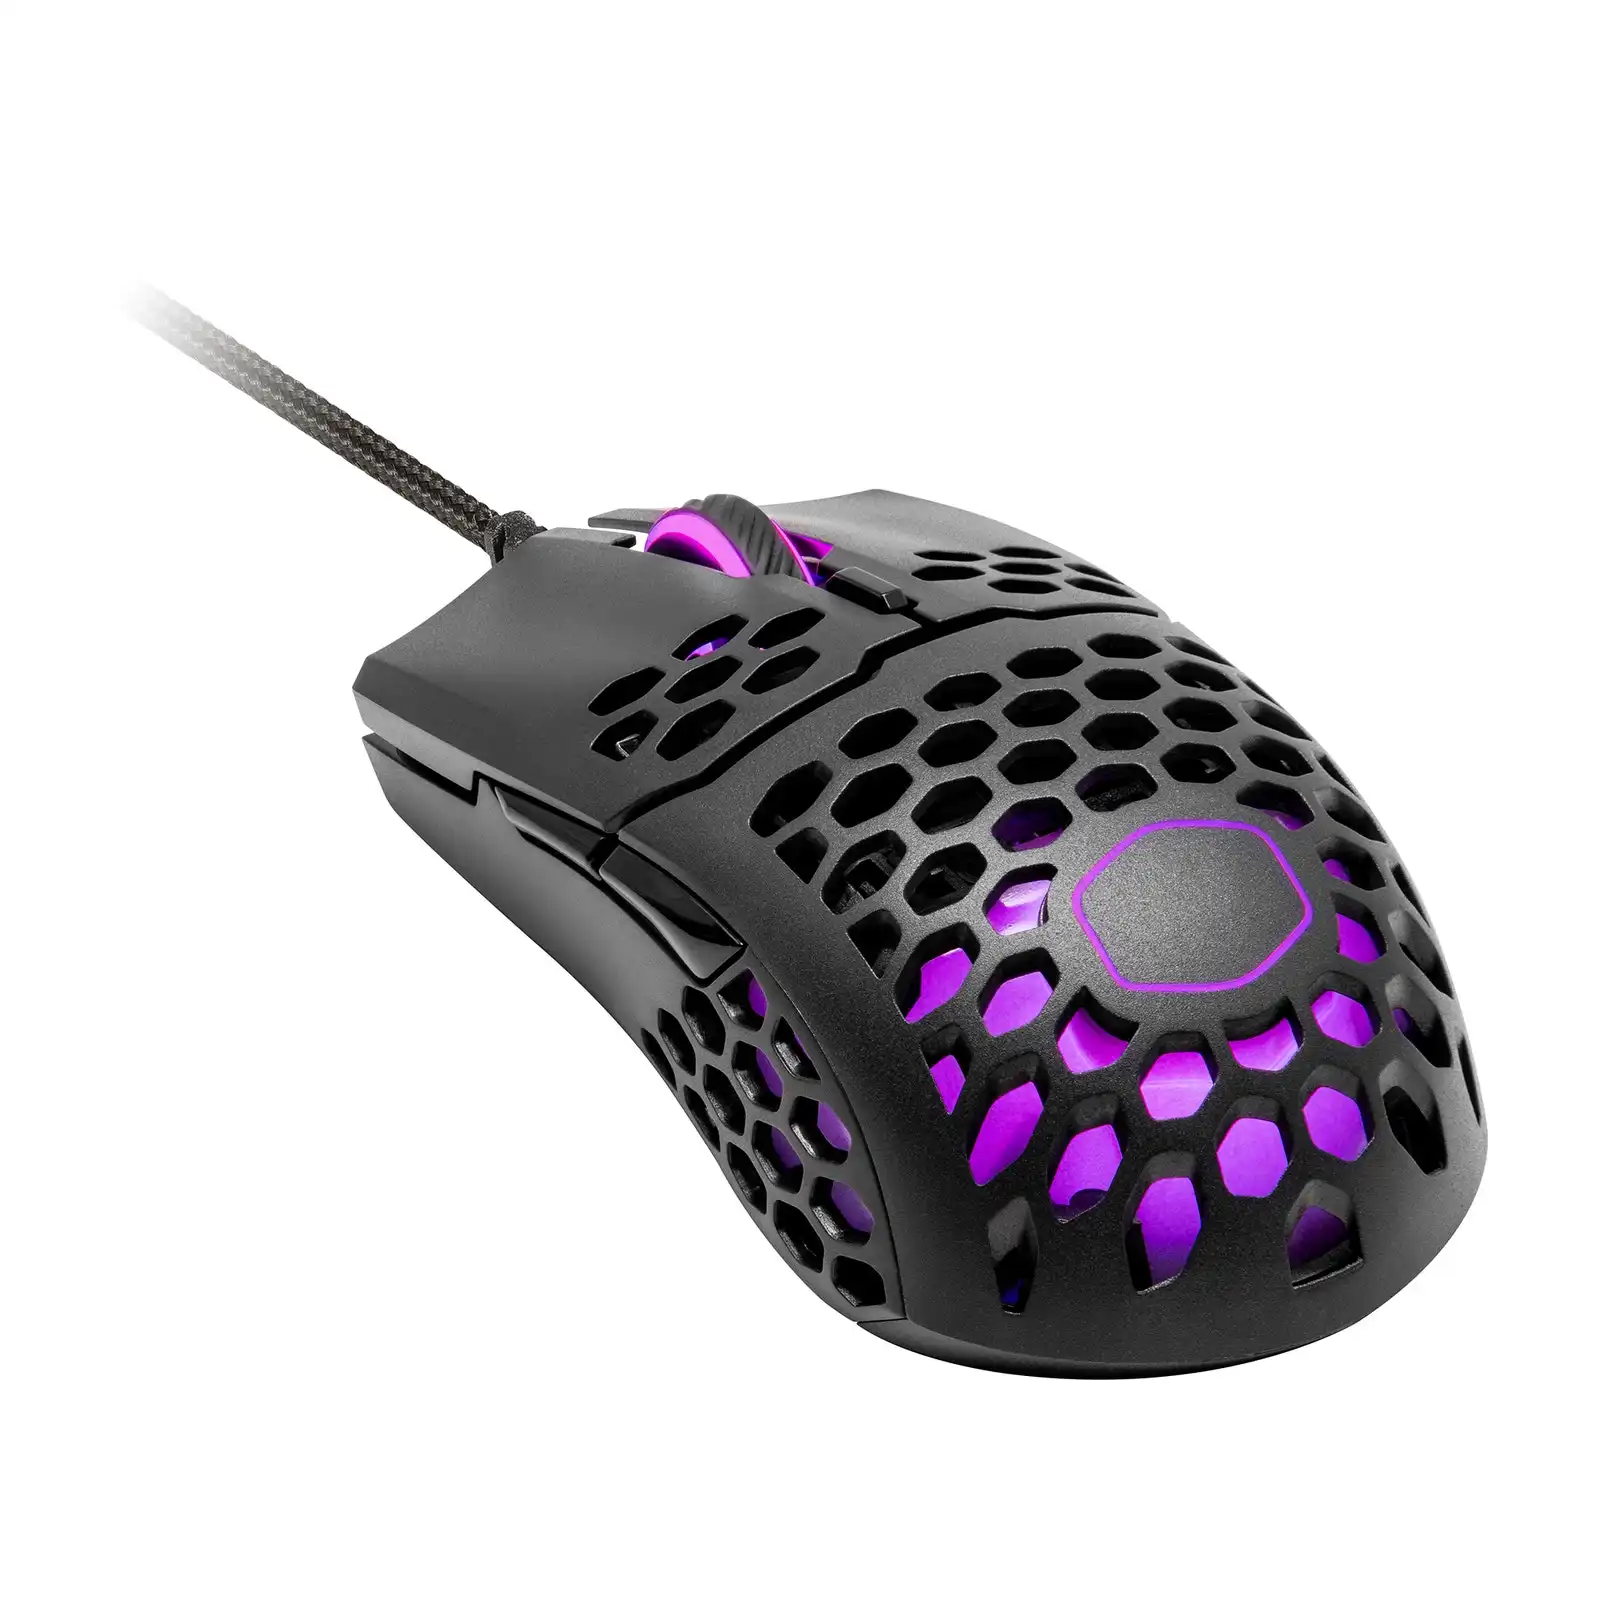 Coolermaster MM711 Lite RGB 10000DPI Wired Gaming Mouse For PC/Laptop Black